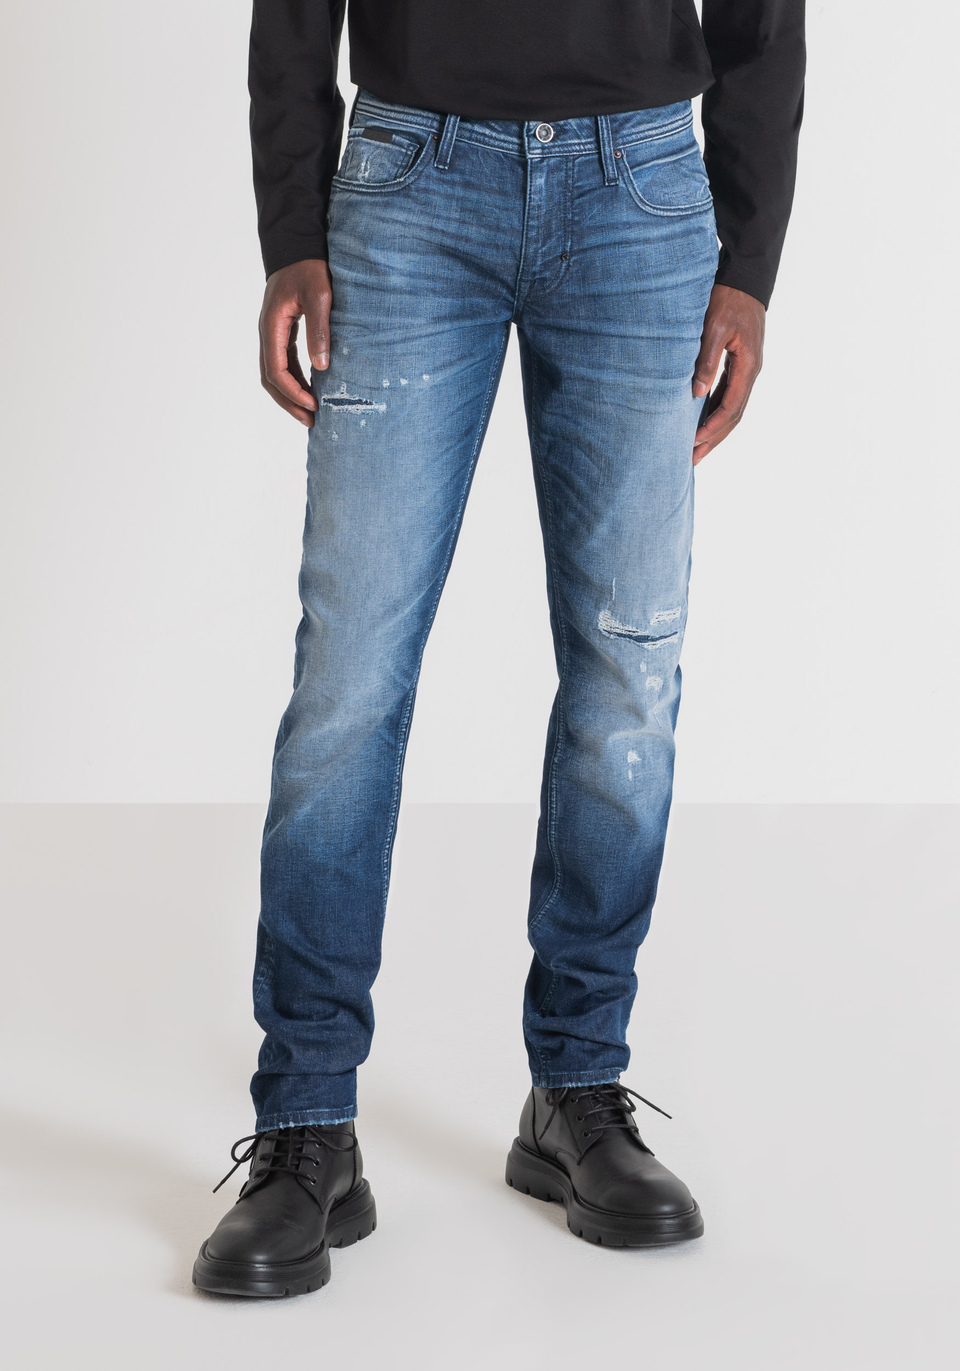 Mens Clothing Jeans Tapered jeans PT Torino Denim Washed Tapered Jeans in Blue for Men 